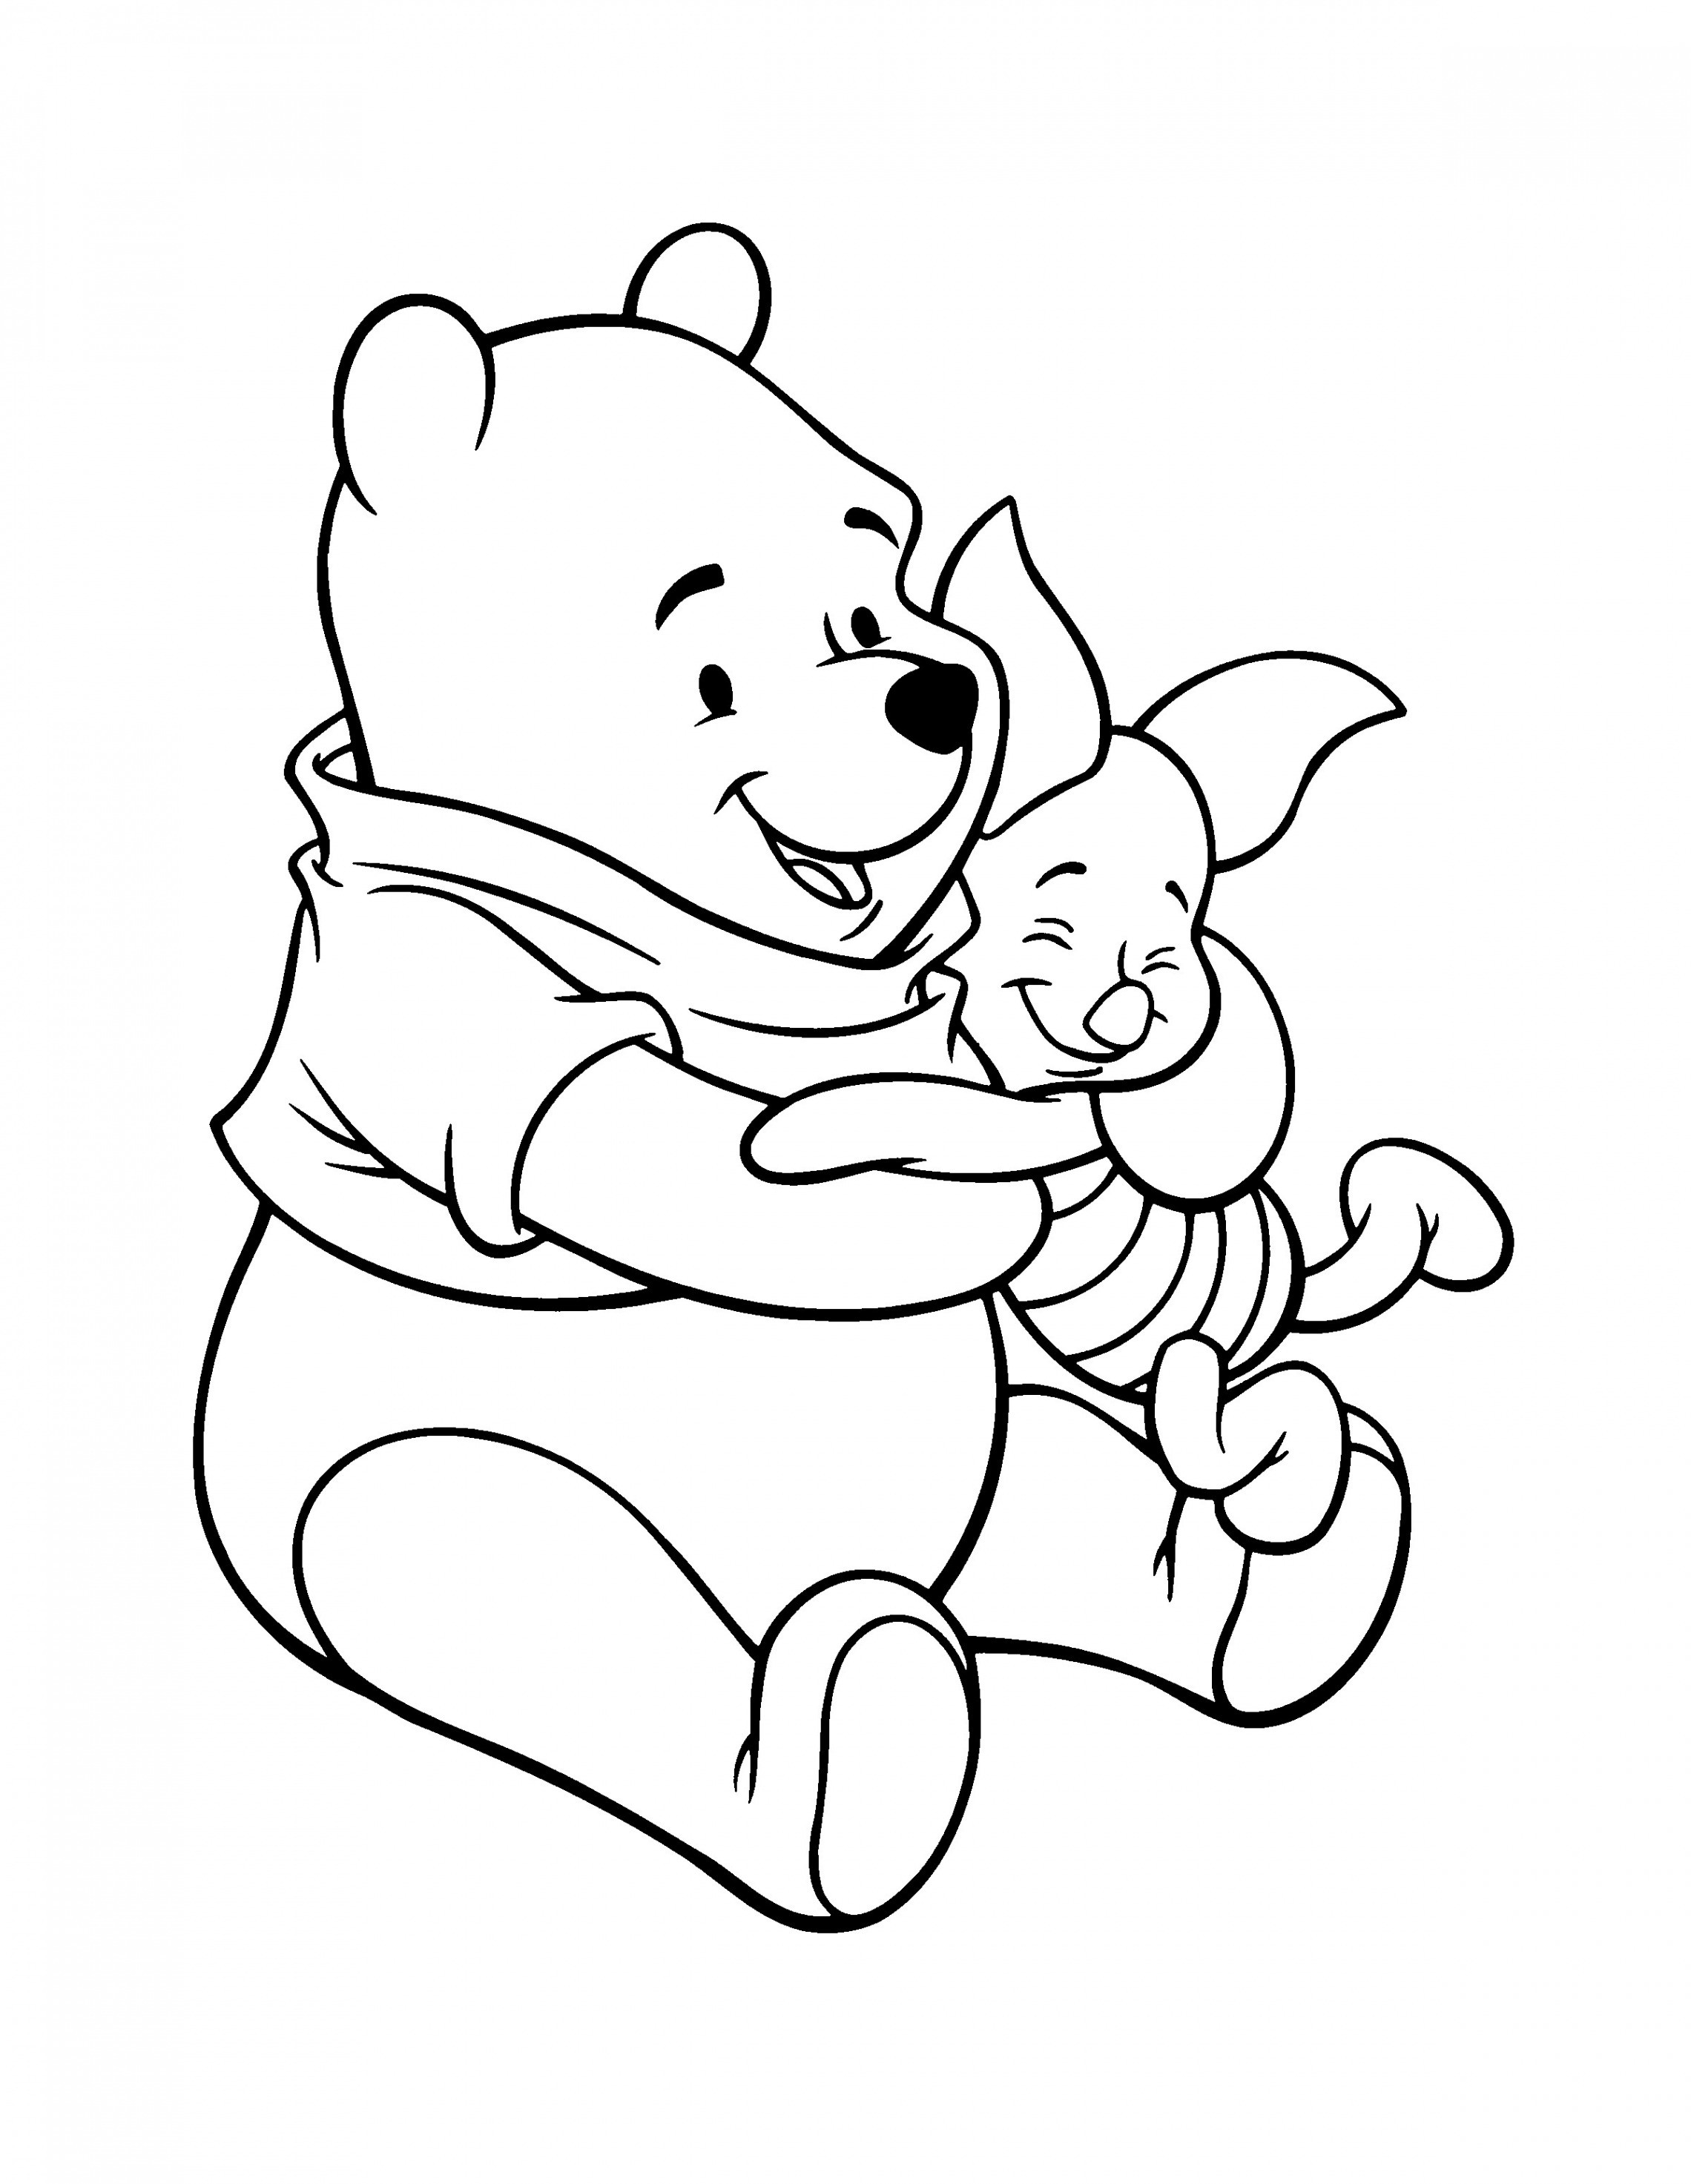 Winnie The Pooh Line Drawing at PaintingValley.com ...